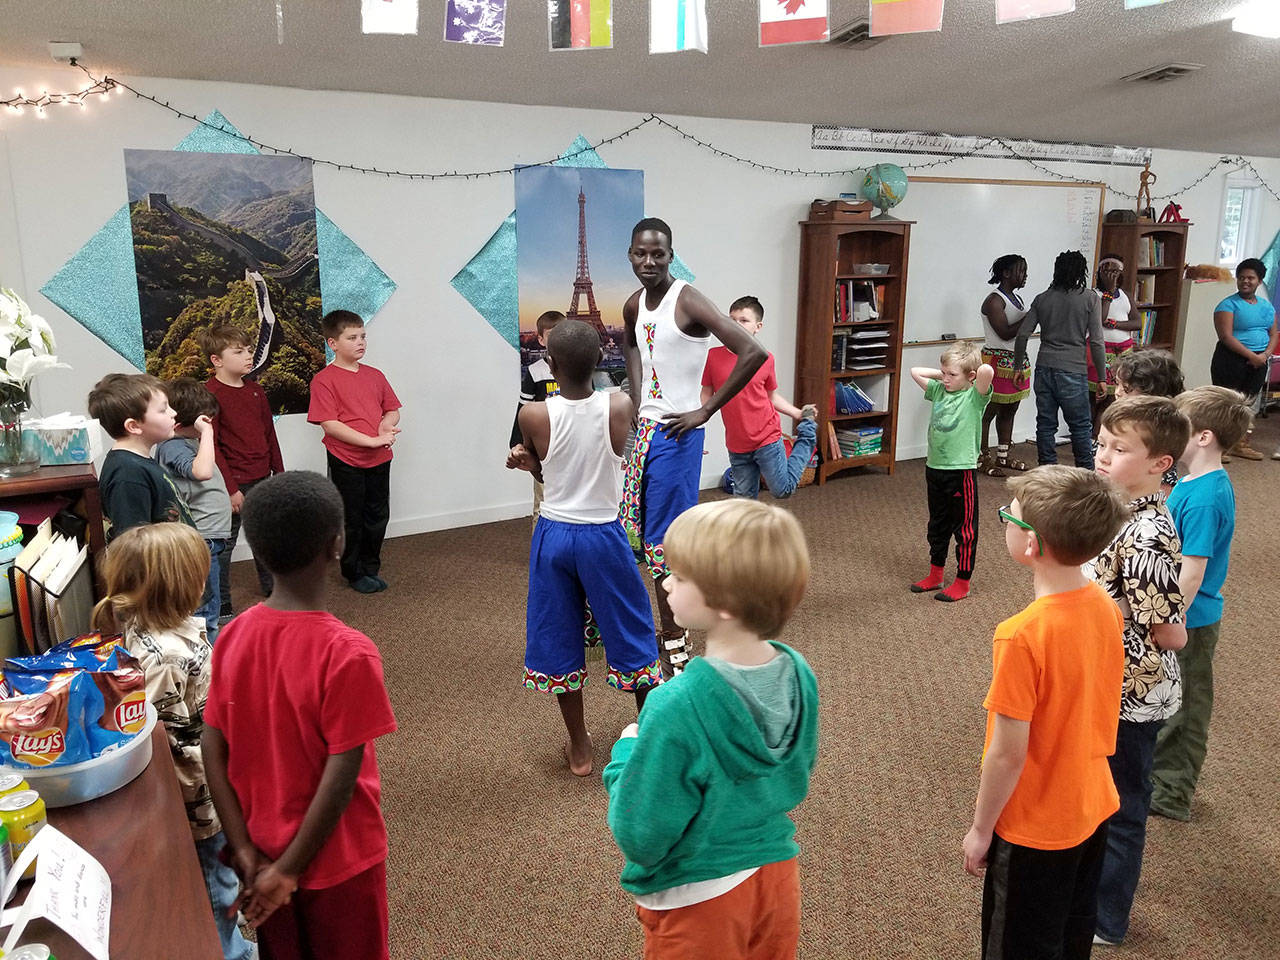 A different of sizes becomes apparent as Dance of Hope performers from Uganda visit Wellington Day School on South Whidbey. Photo provided